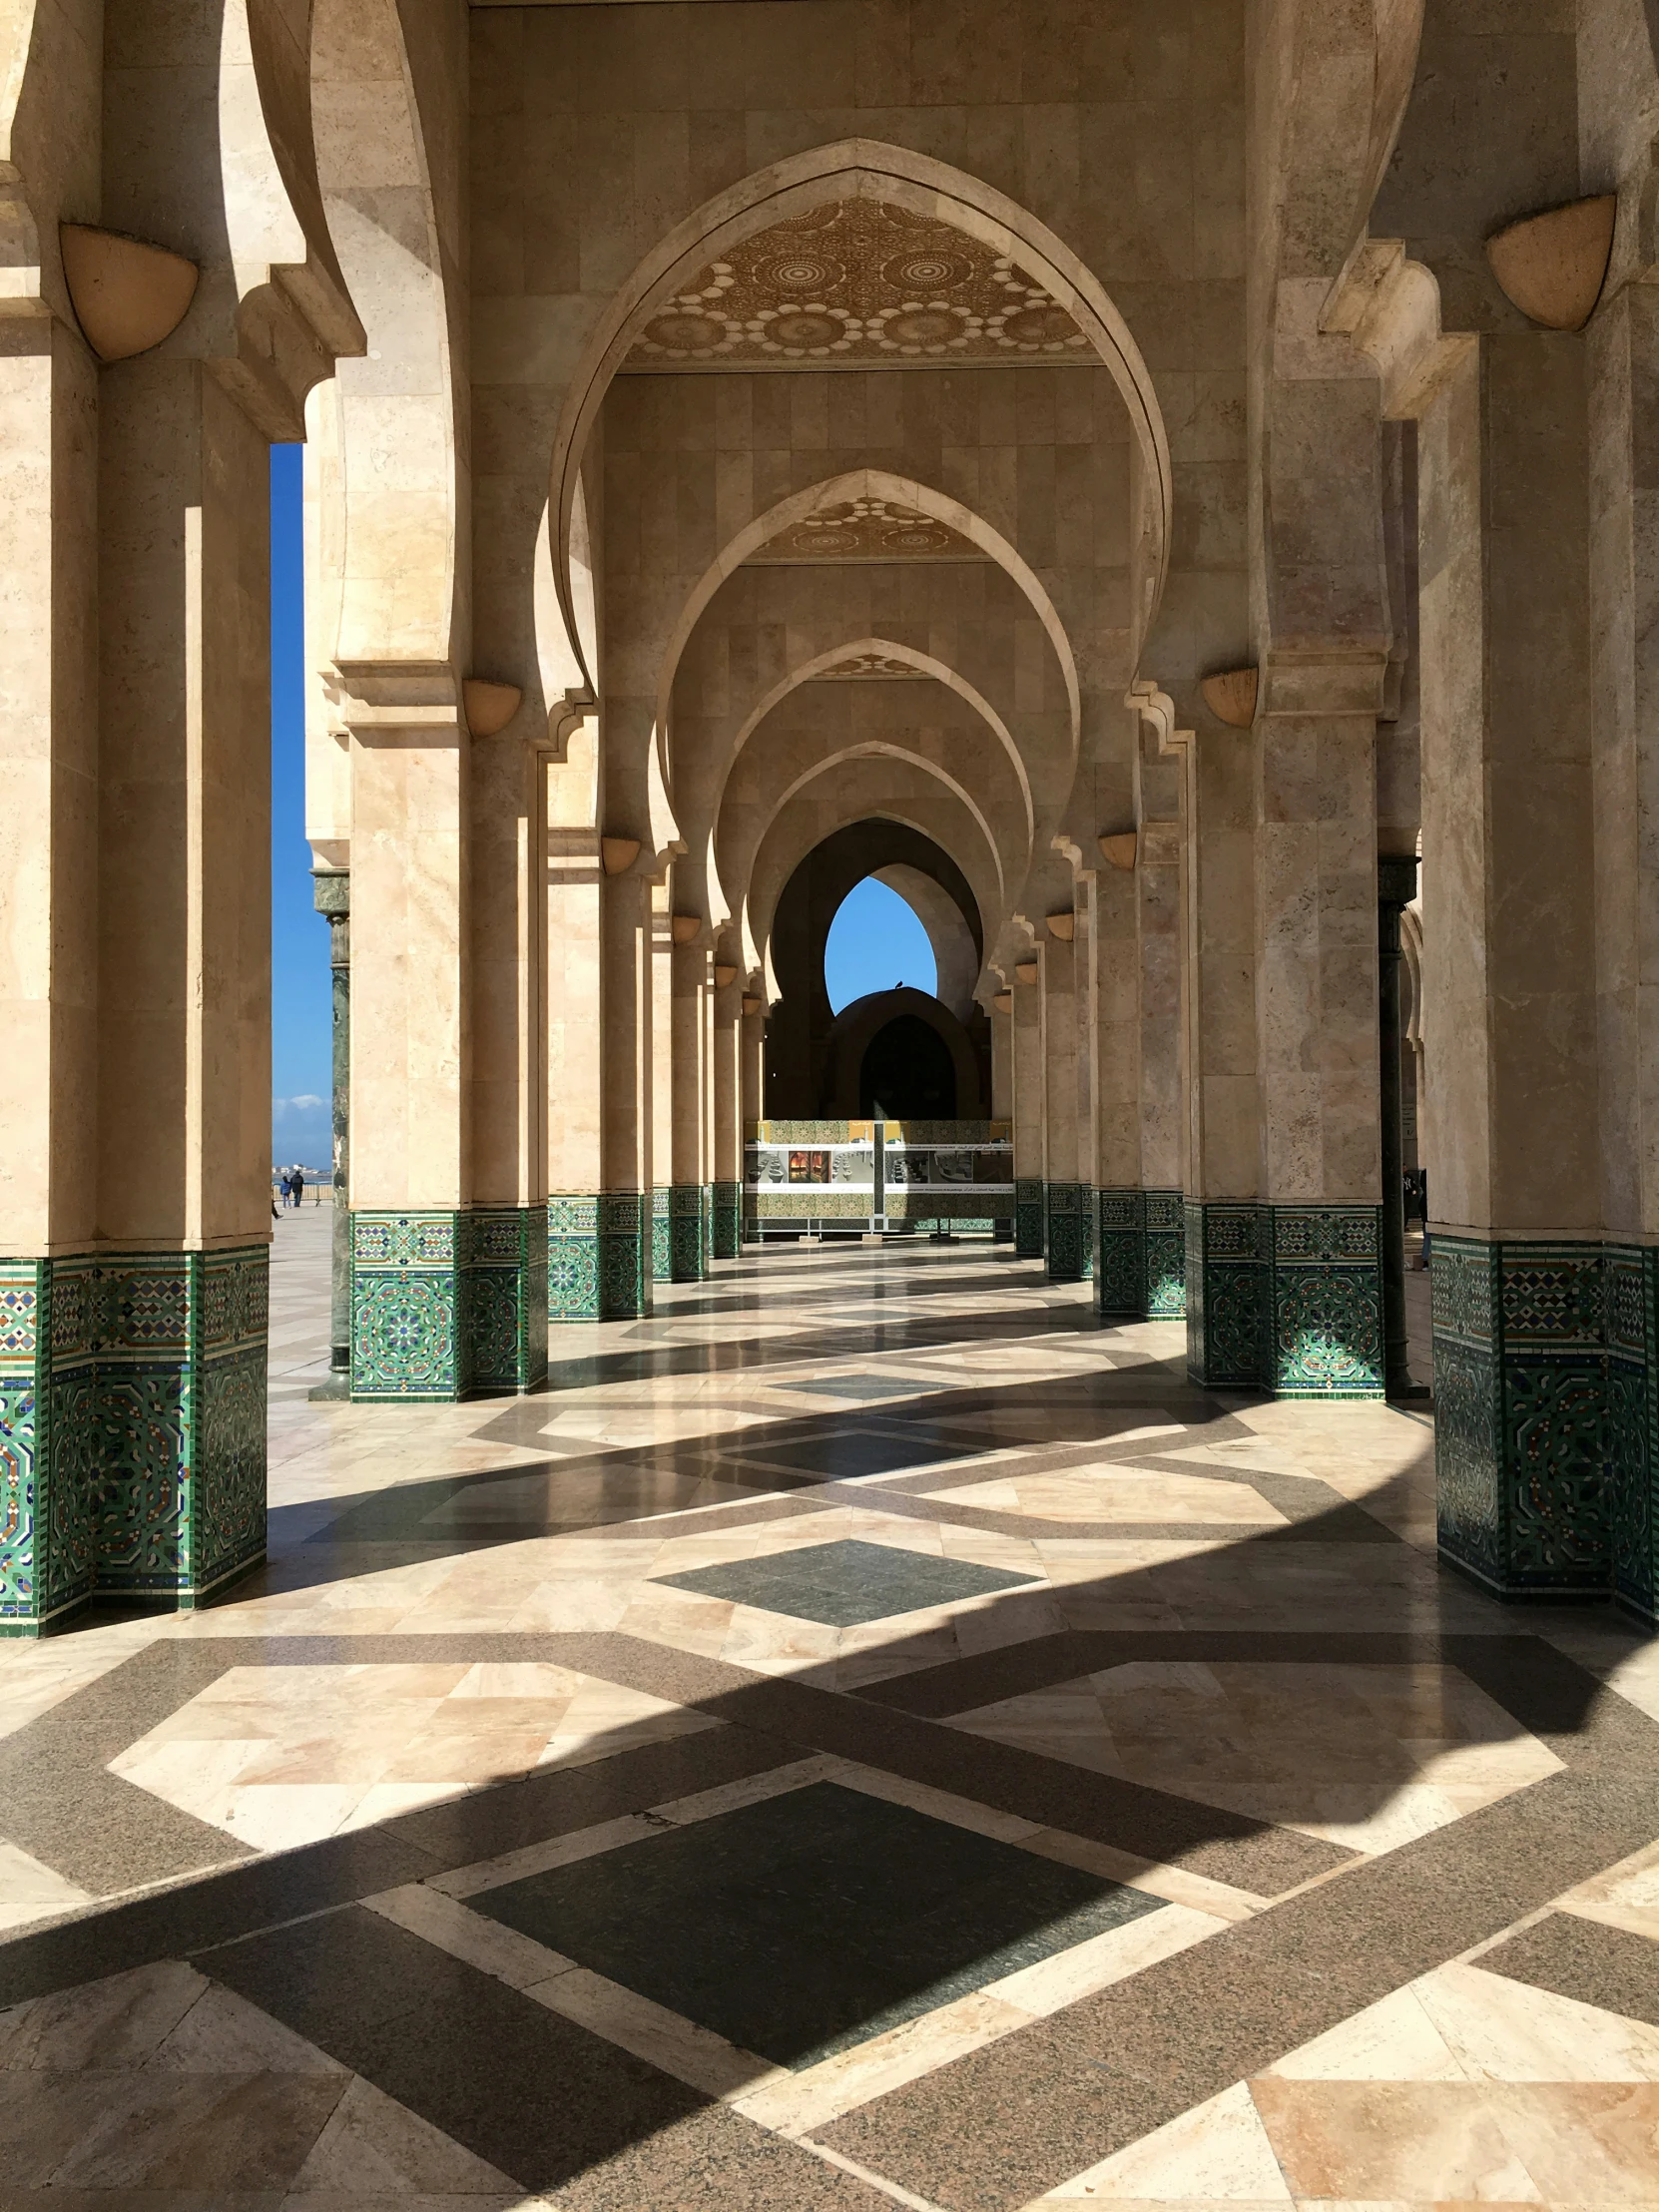 the tiled walkway under an archway with blue sky in the background